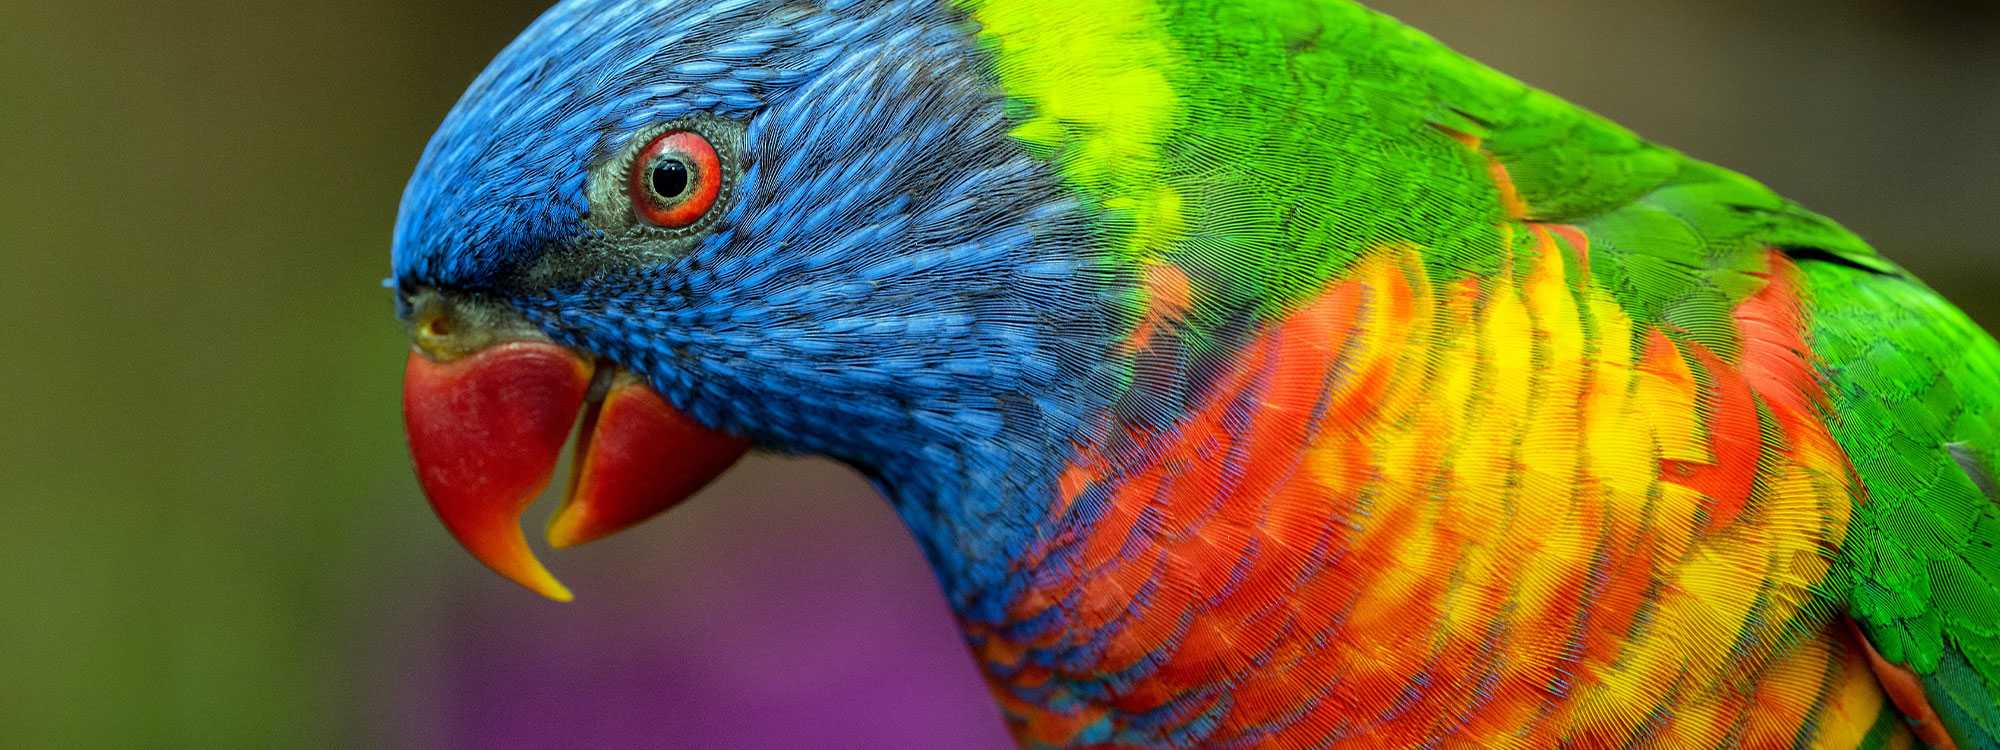 Yellow, blue, red, and green bird in close-up photograph